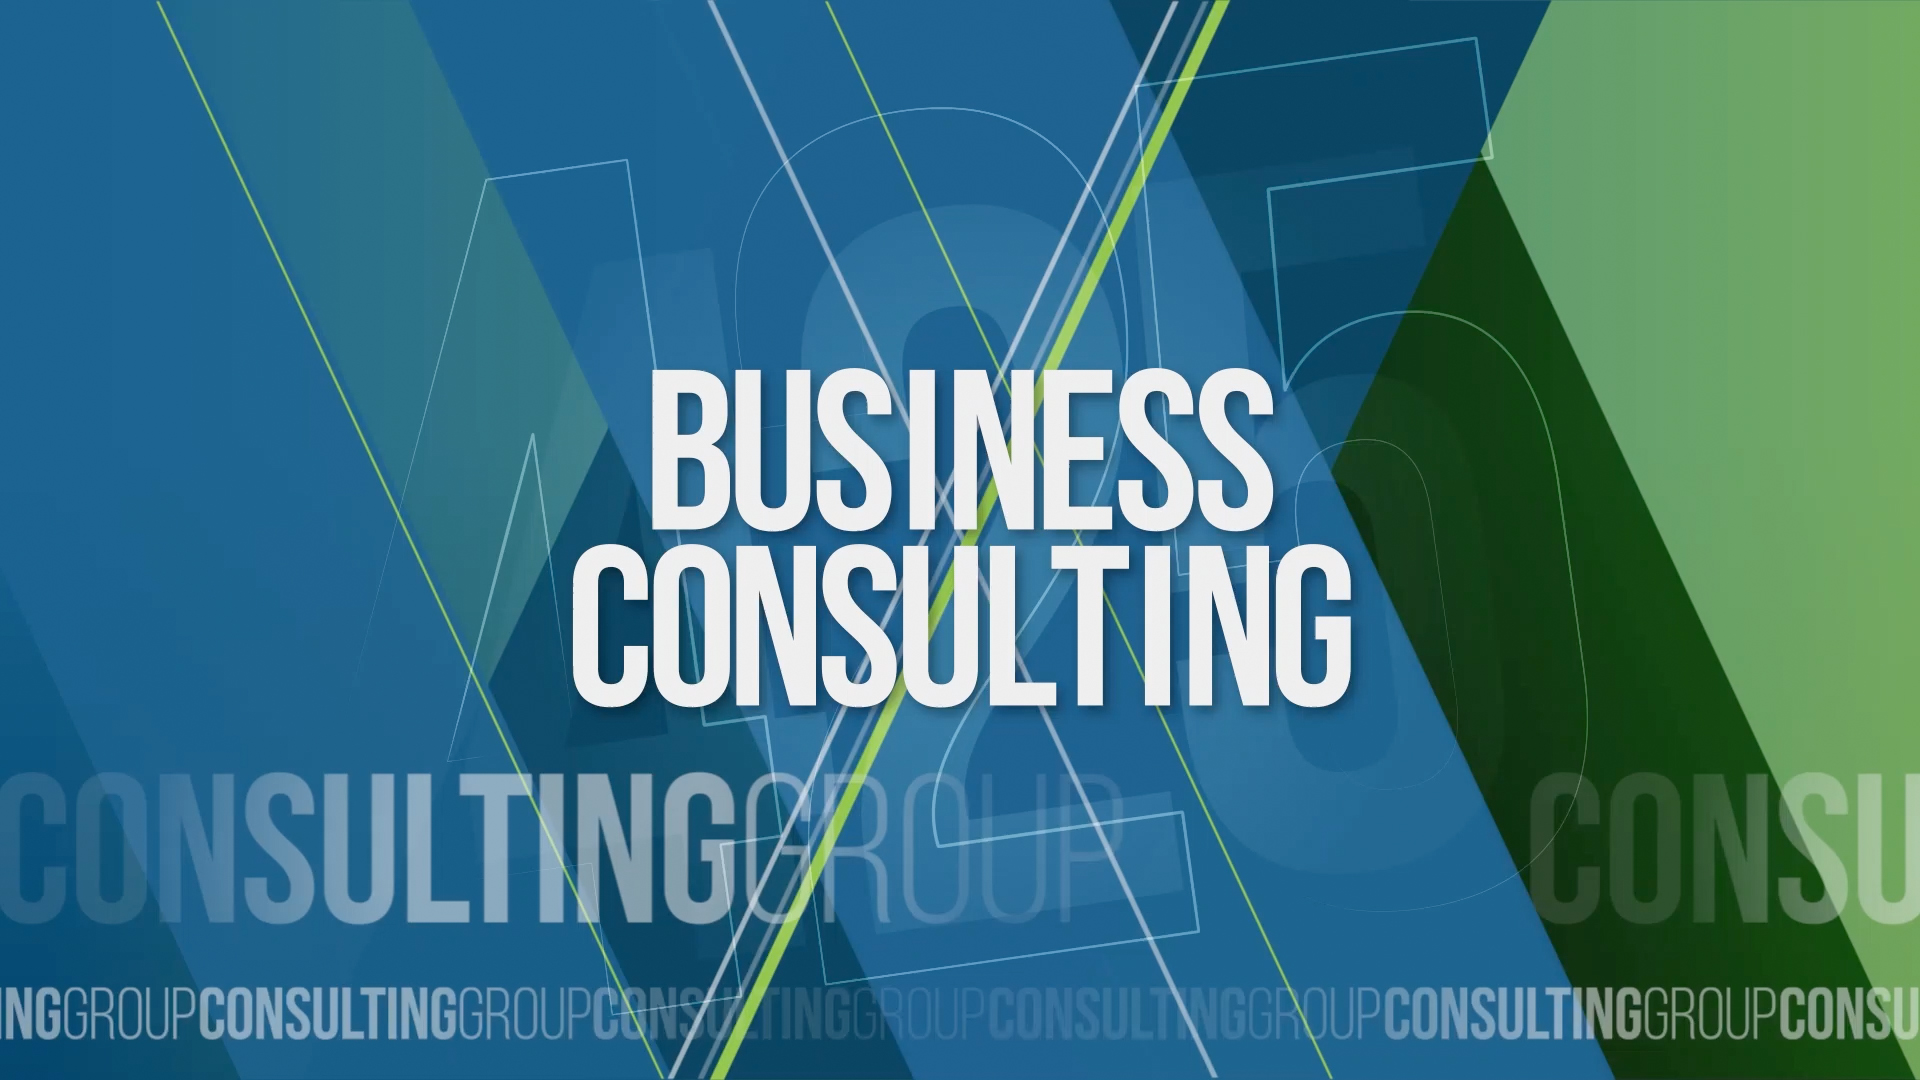 425 Consulting Group | Business Consulting